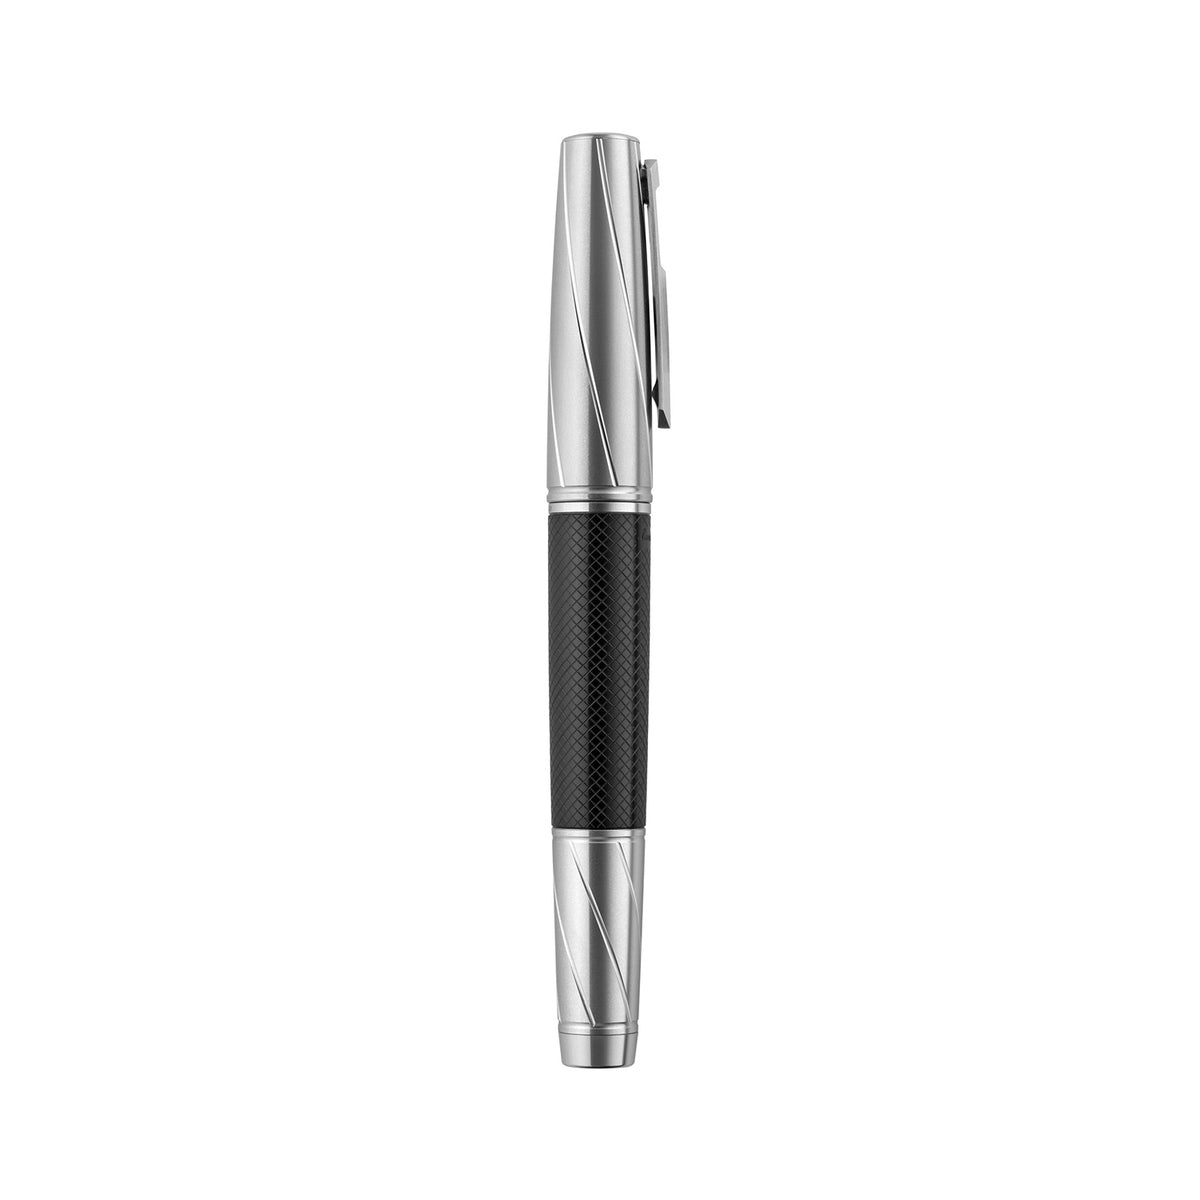 James Bond 007 Spymaster Duo Rollerball Pen - Numbered Edition - By Montegrappa